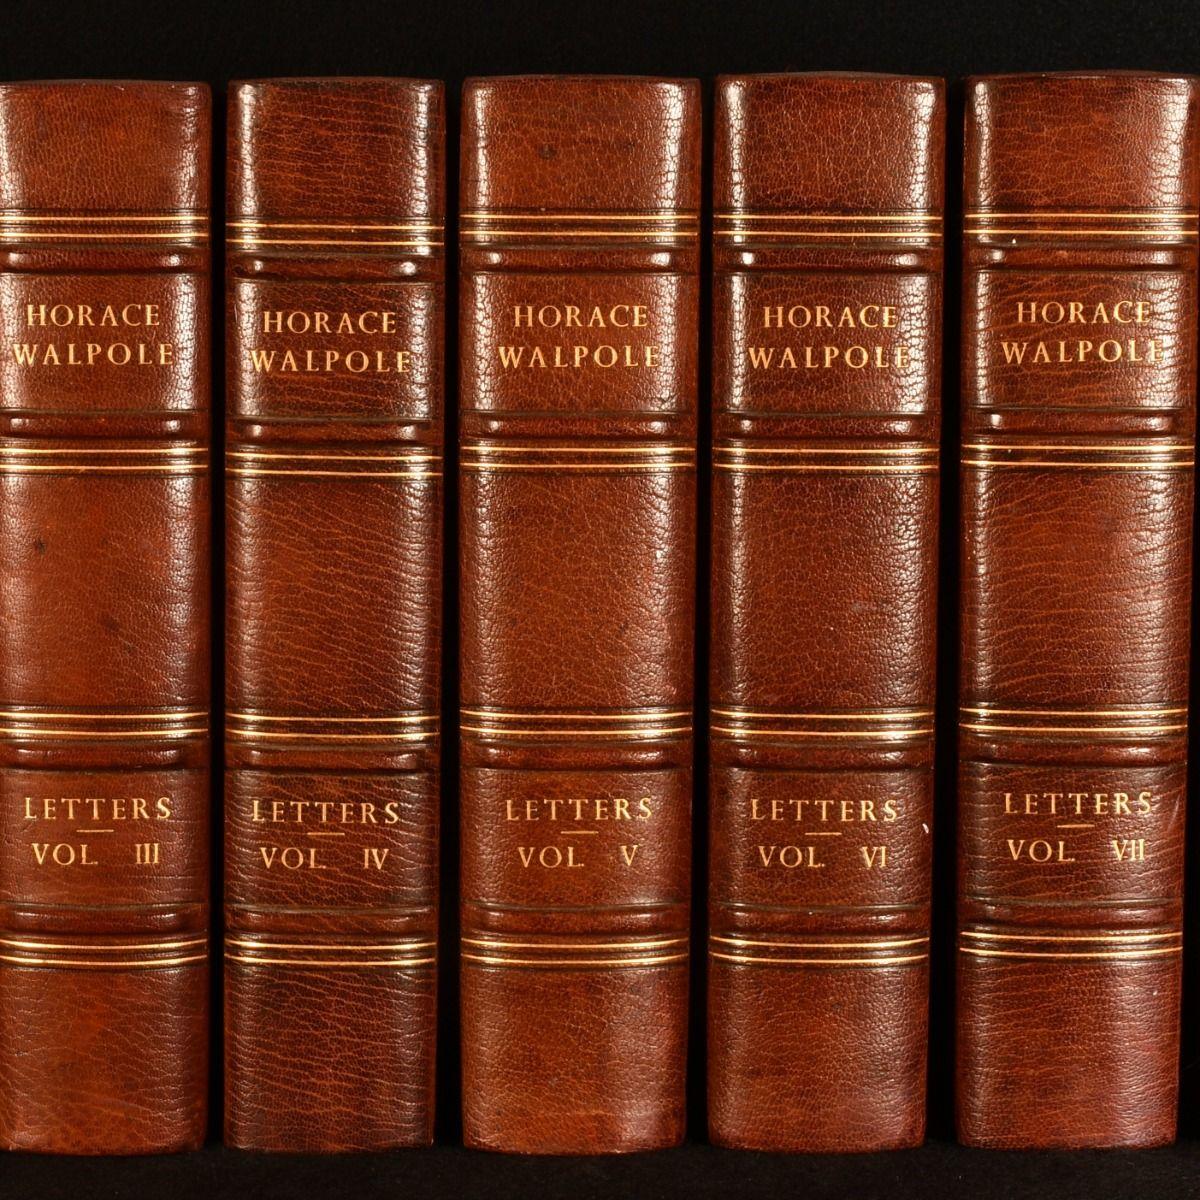 An illustrated limited edition collection of the letters of Horace Walpole, totalling over two thousands letters written during his lifetime.

A limited edition, limited to one hundred copies, of which this is numbered ninety.

Complete in nine